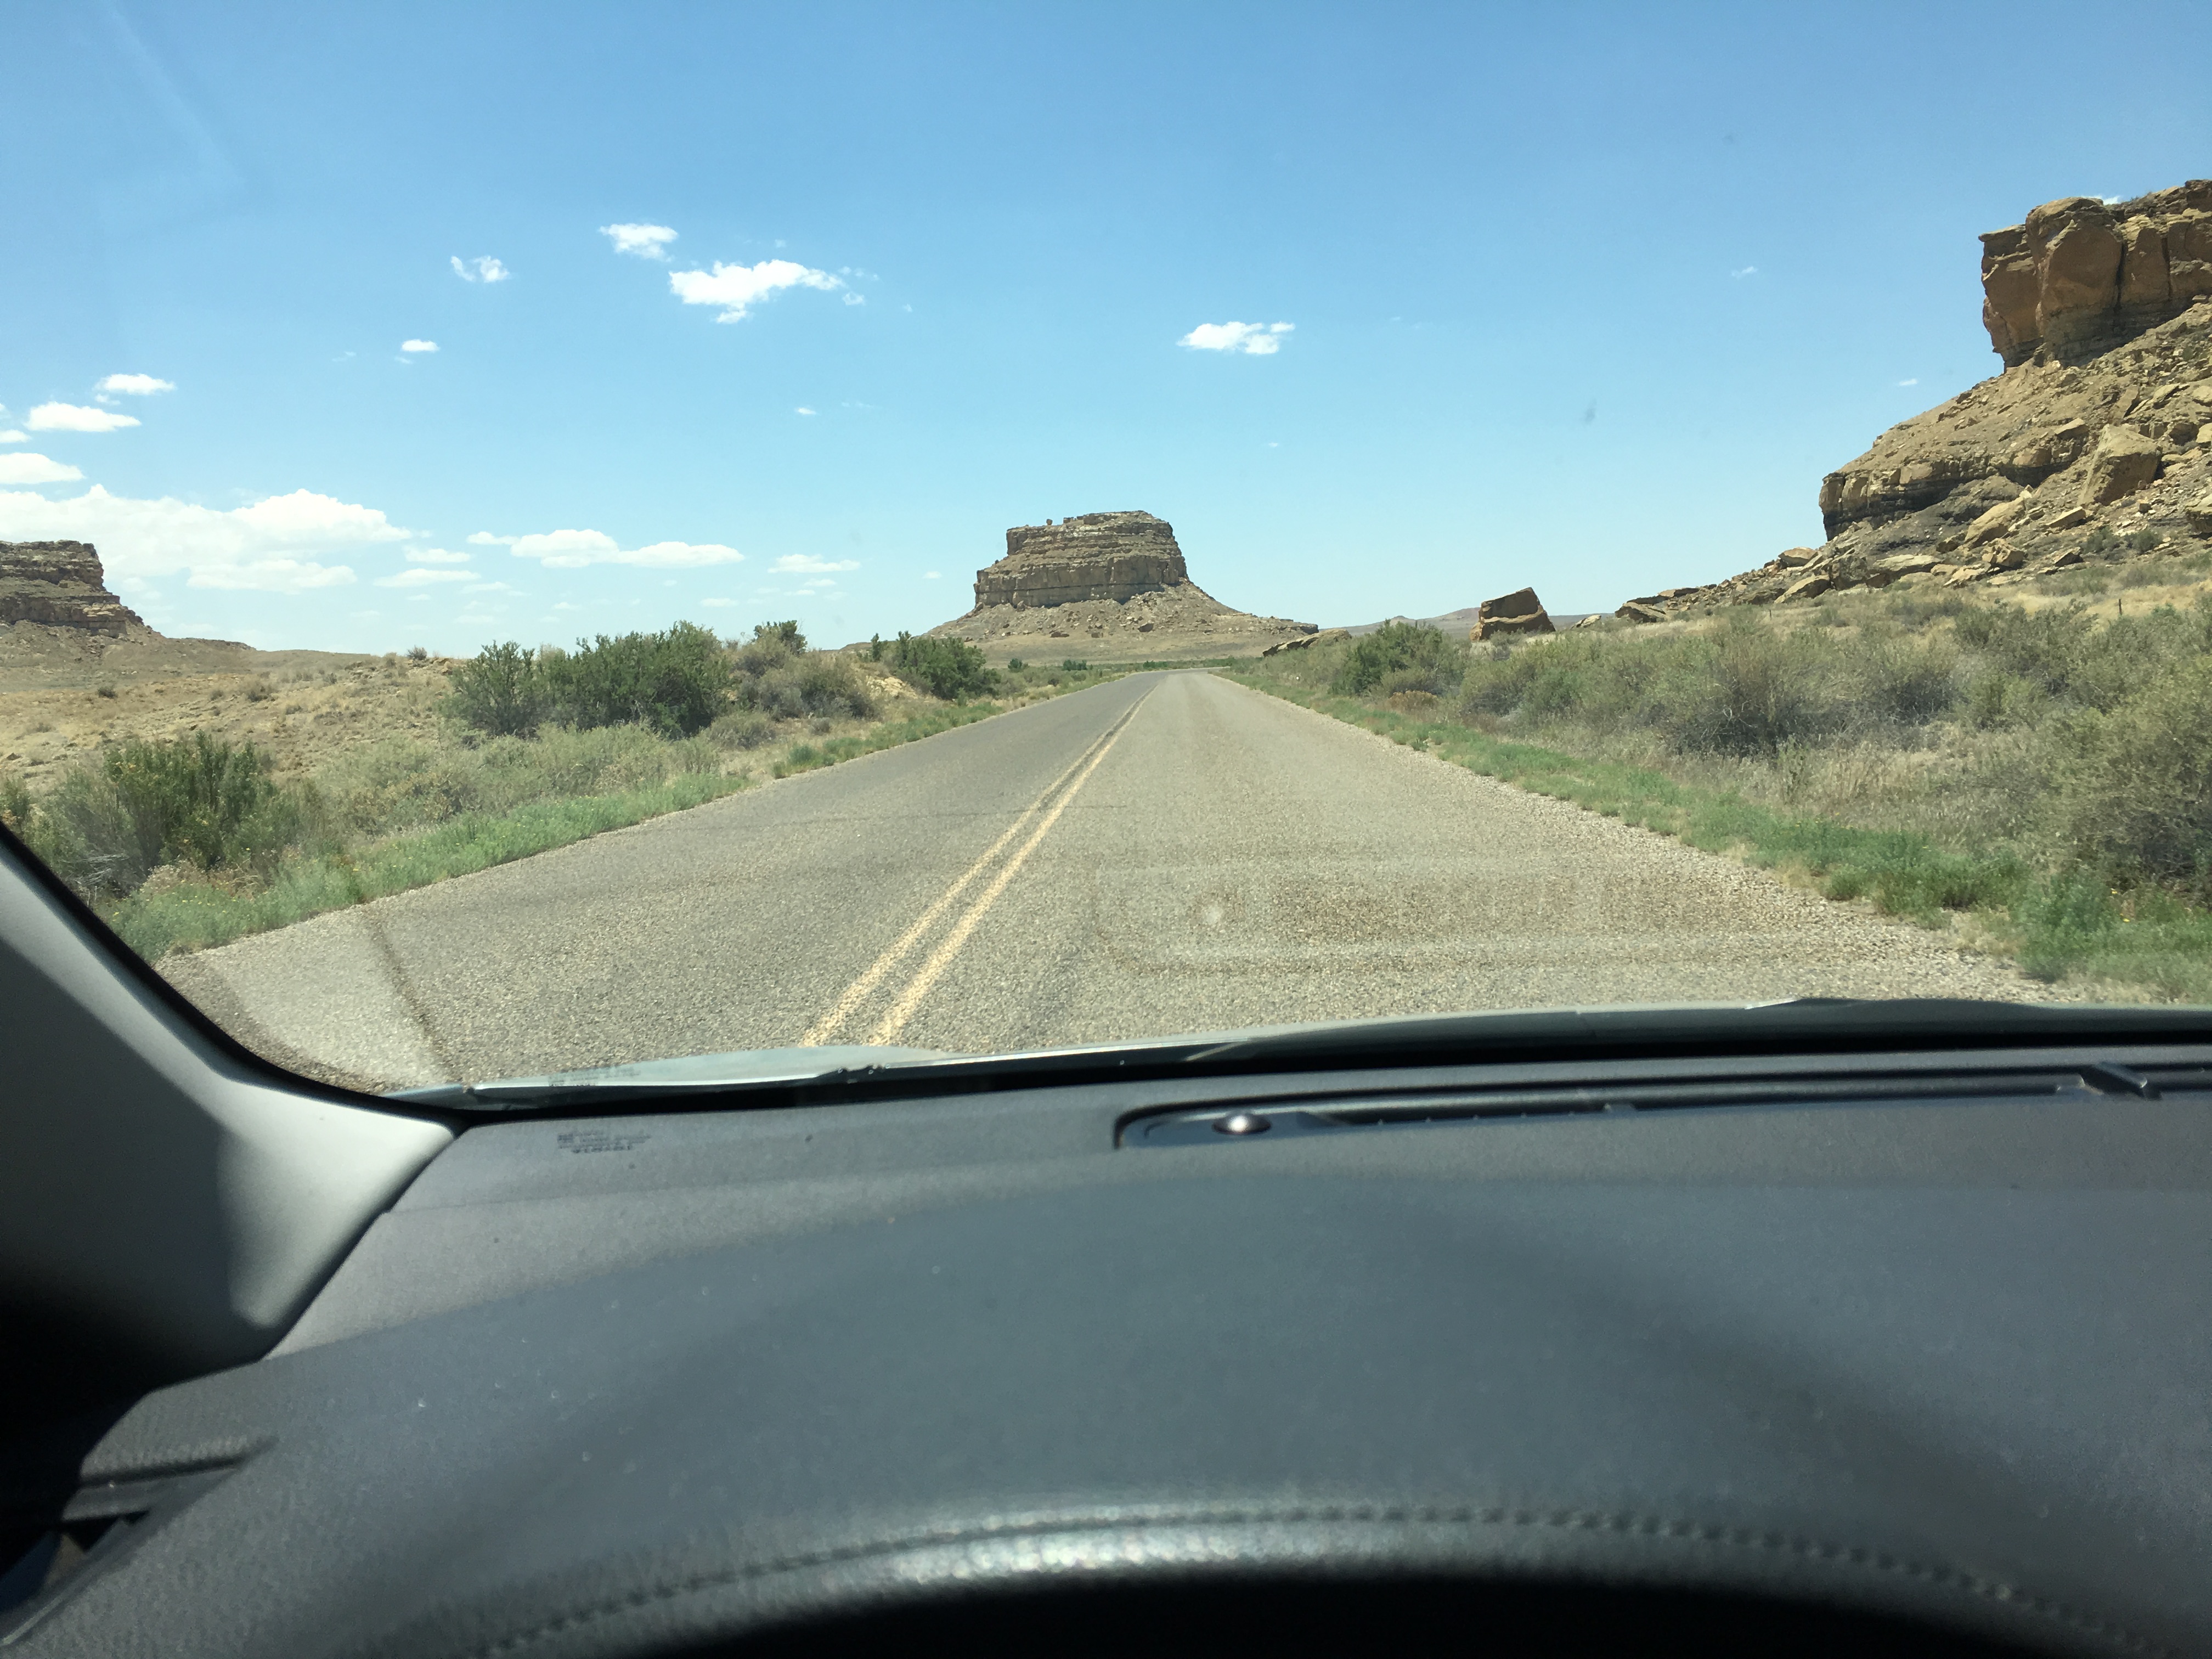 Driving into Chaco with Fajada Butte